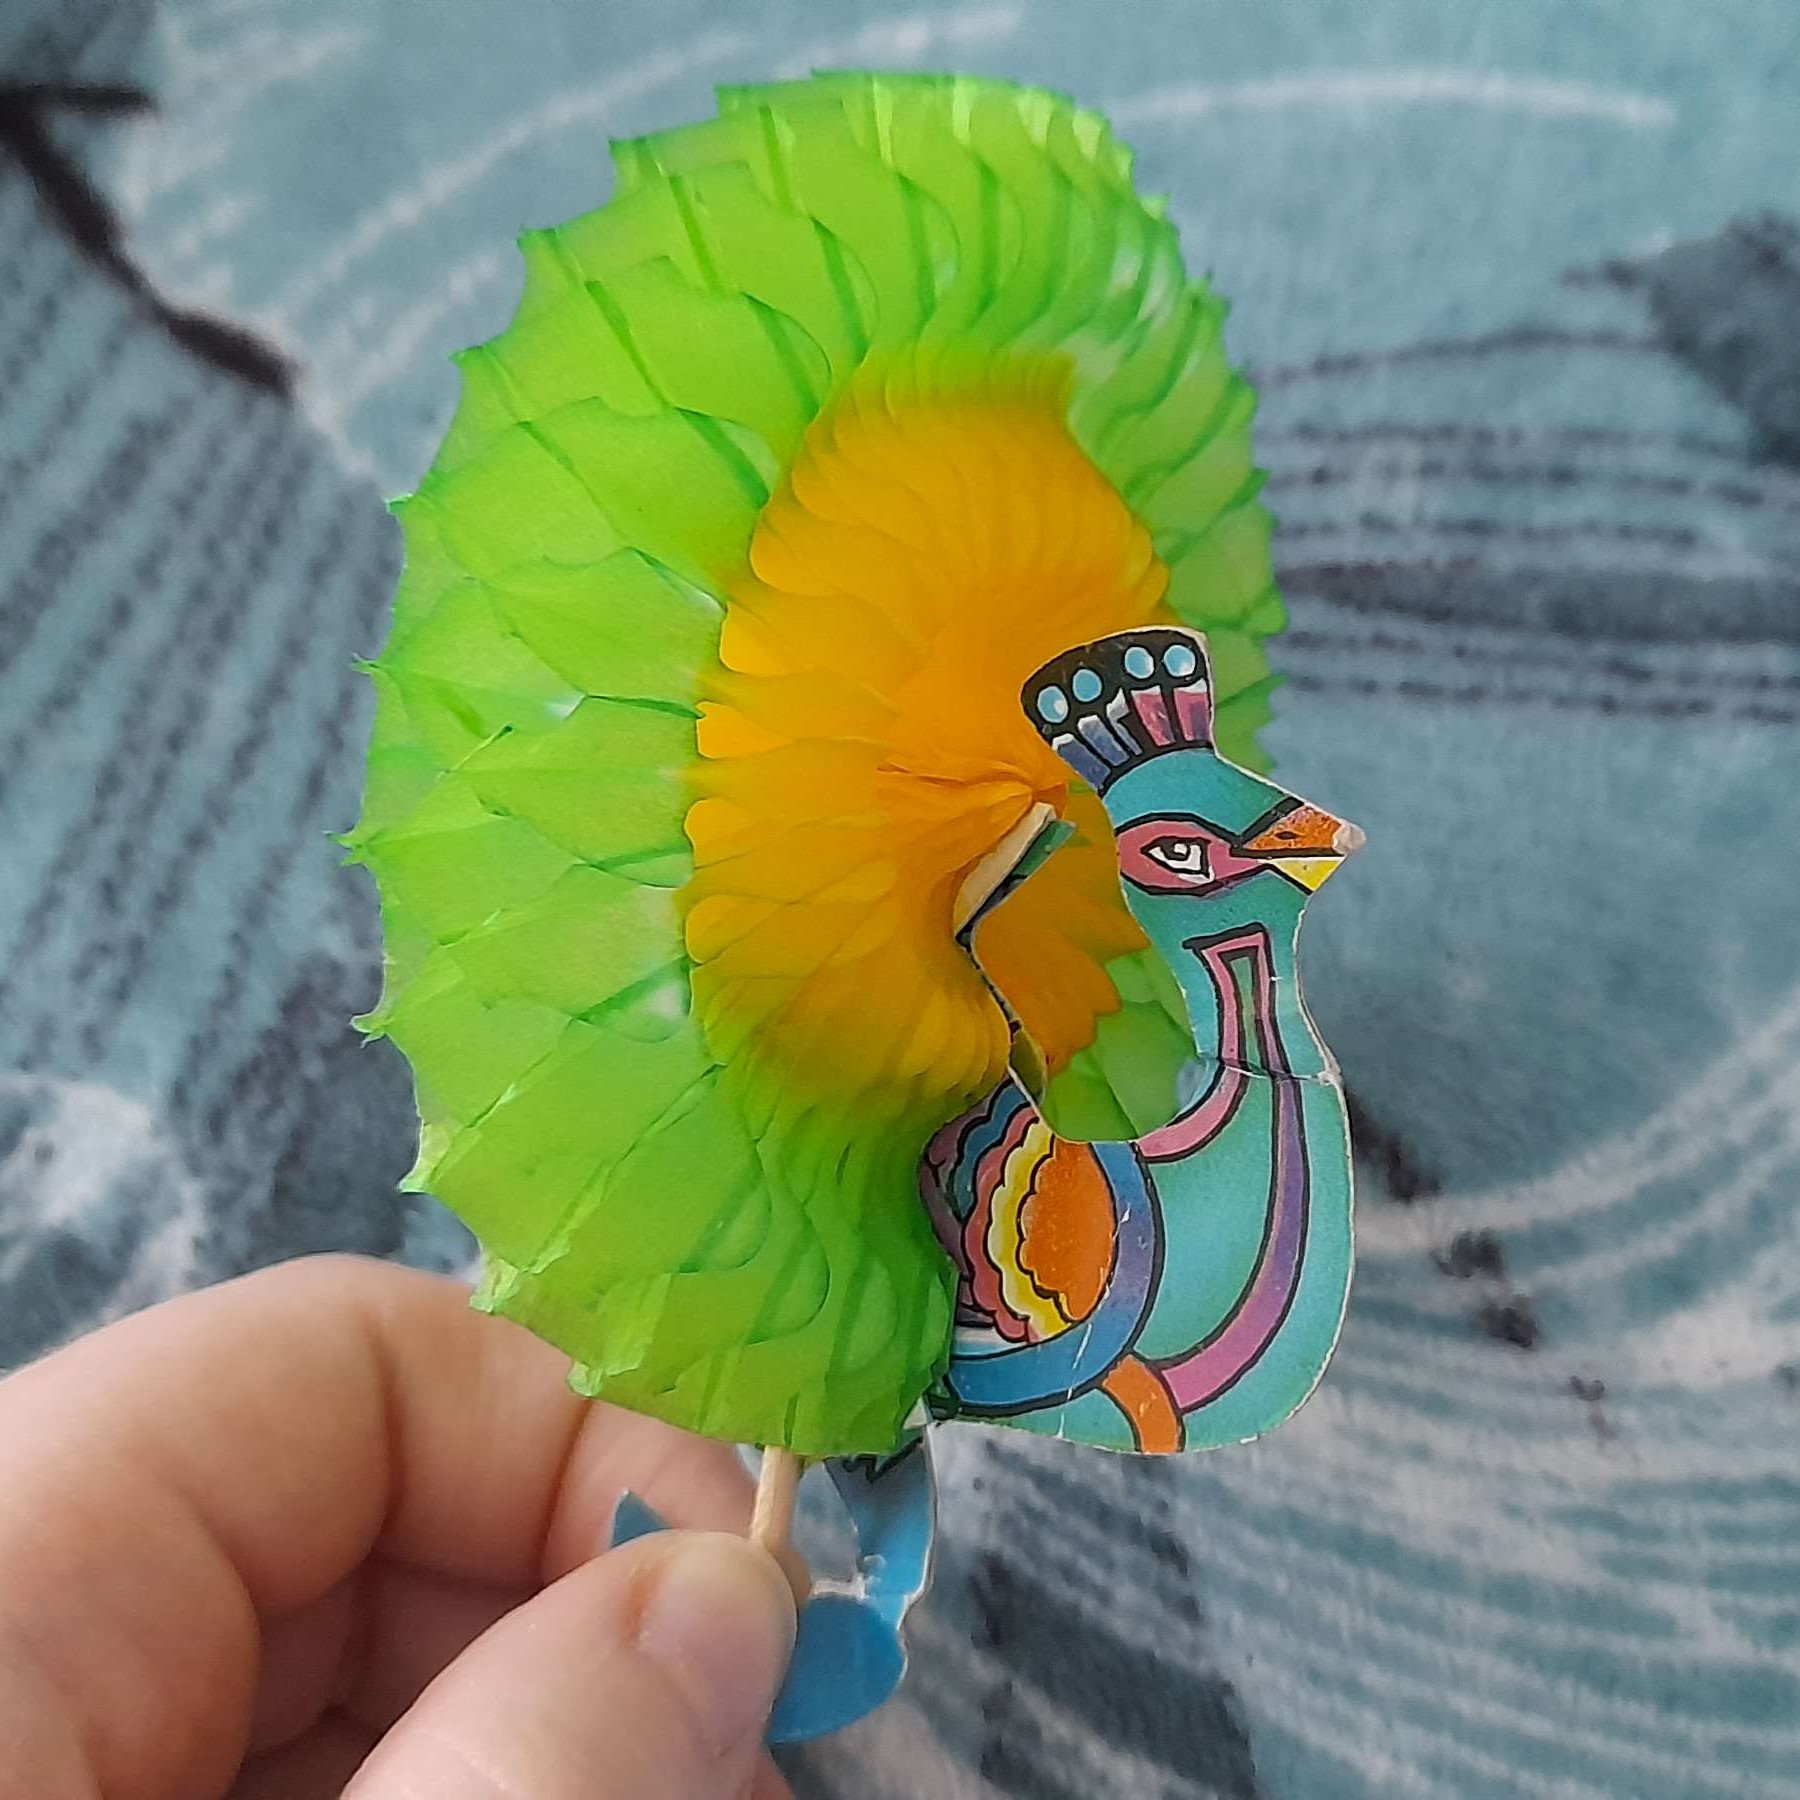 a paper peacock cocktail decoration thingy. the quote-unquote 'feathers' are spread out, revealing a green and yellow circle of paper as the tail